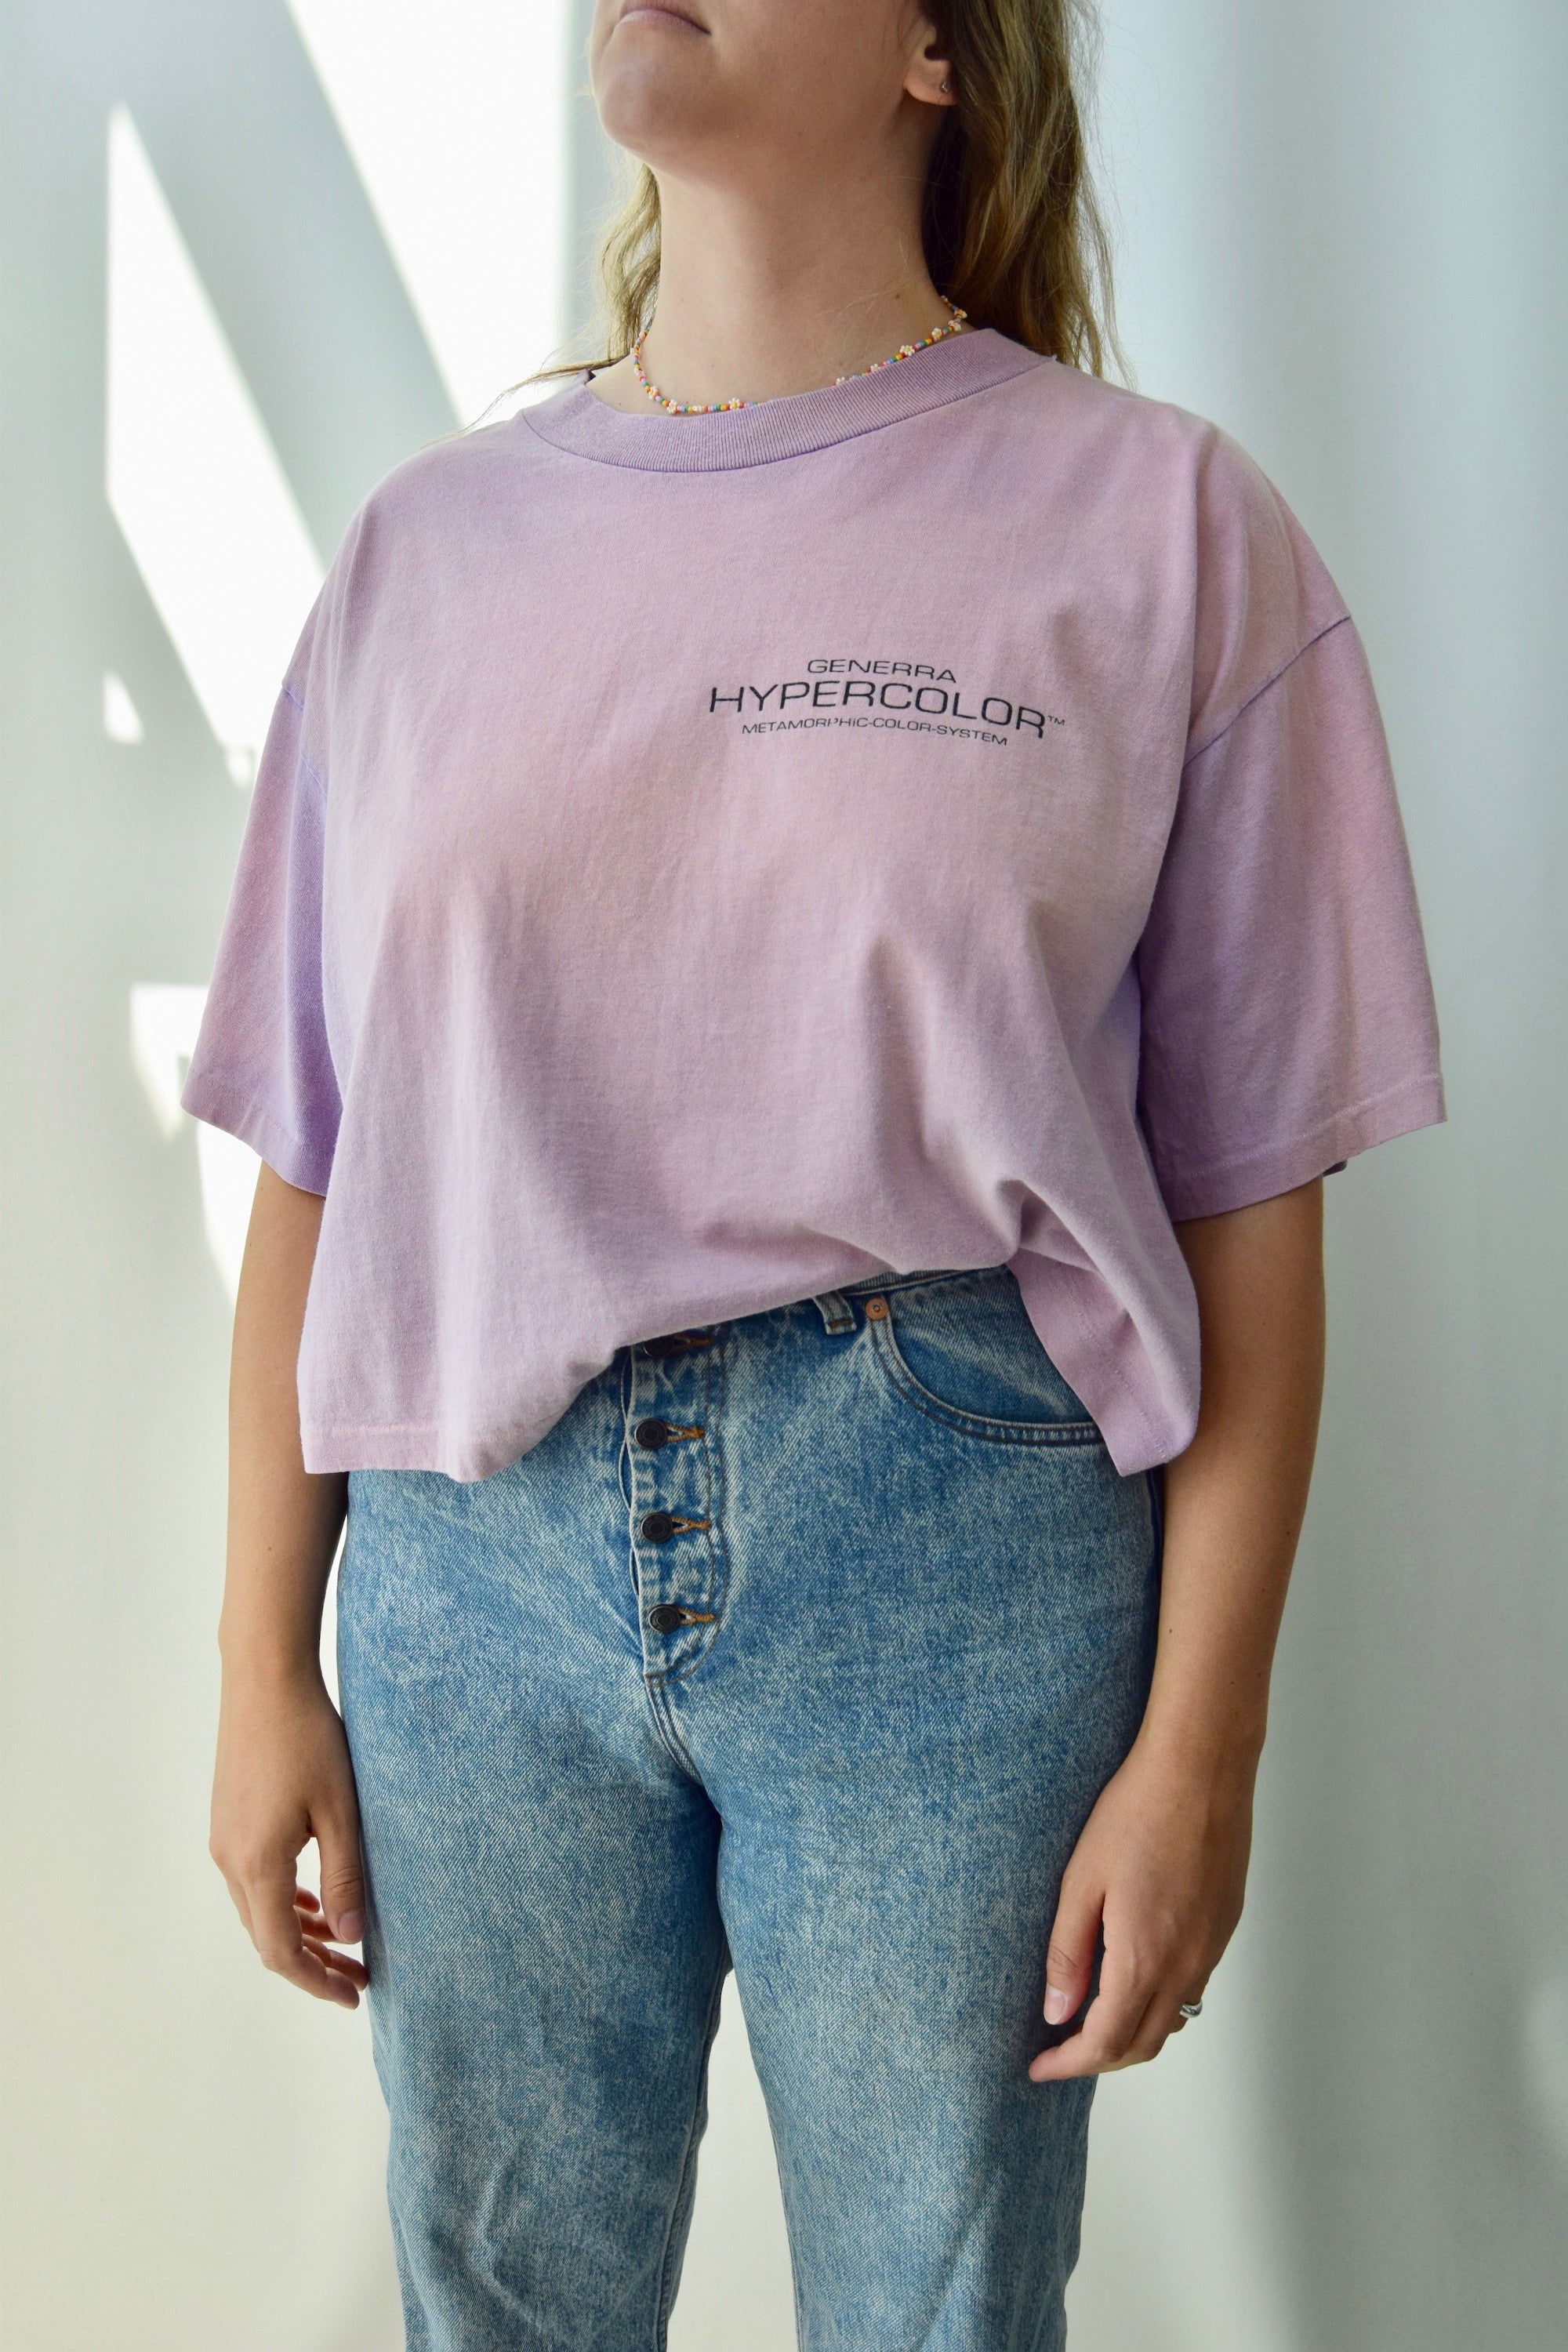 Hypercolor Cropped Tee